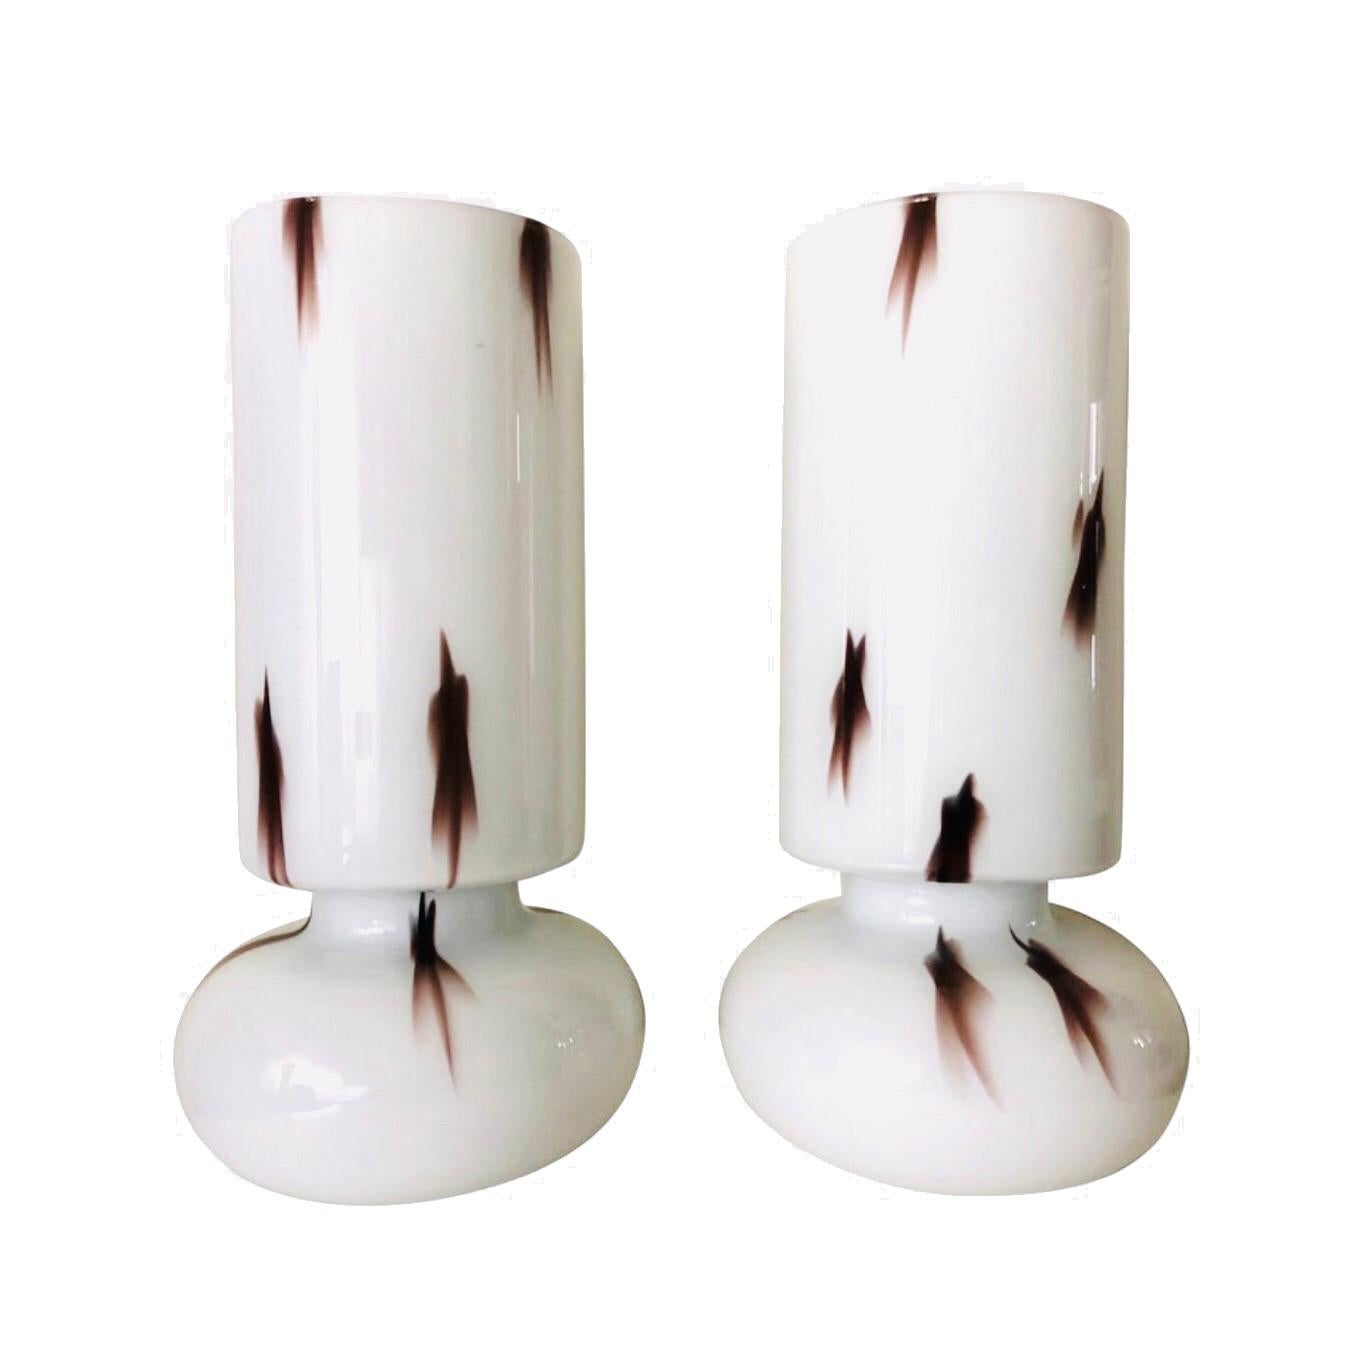 Late 20th Century Pair of Mid Century Opaline Glass Table Lamps by Fiamma S.A. Barcelona, 1970s